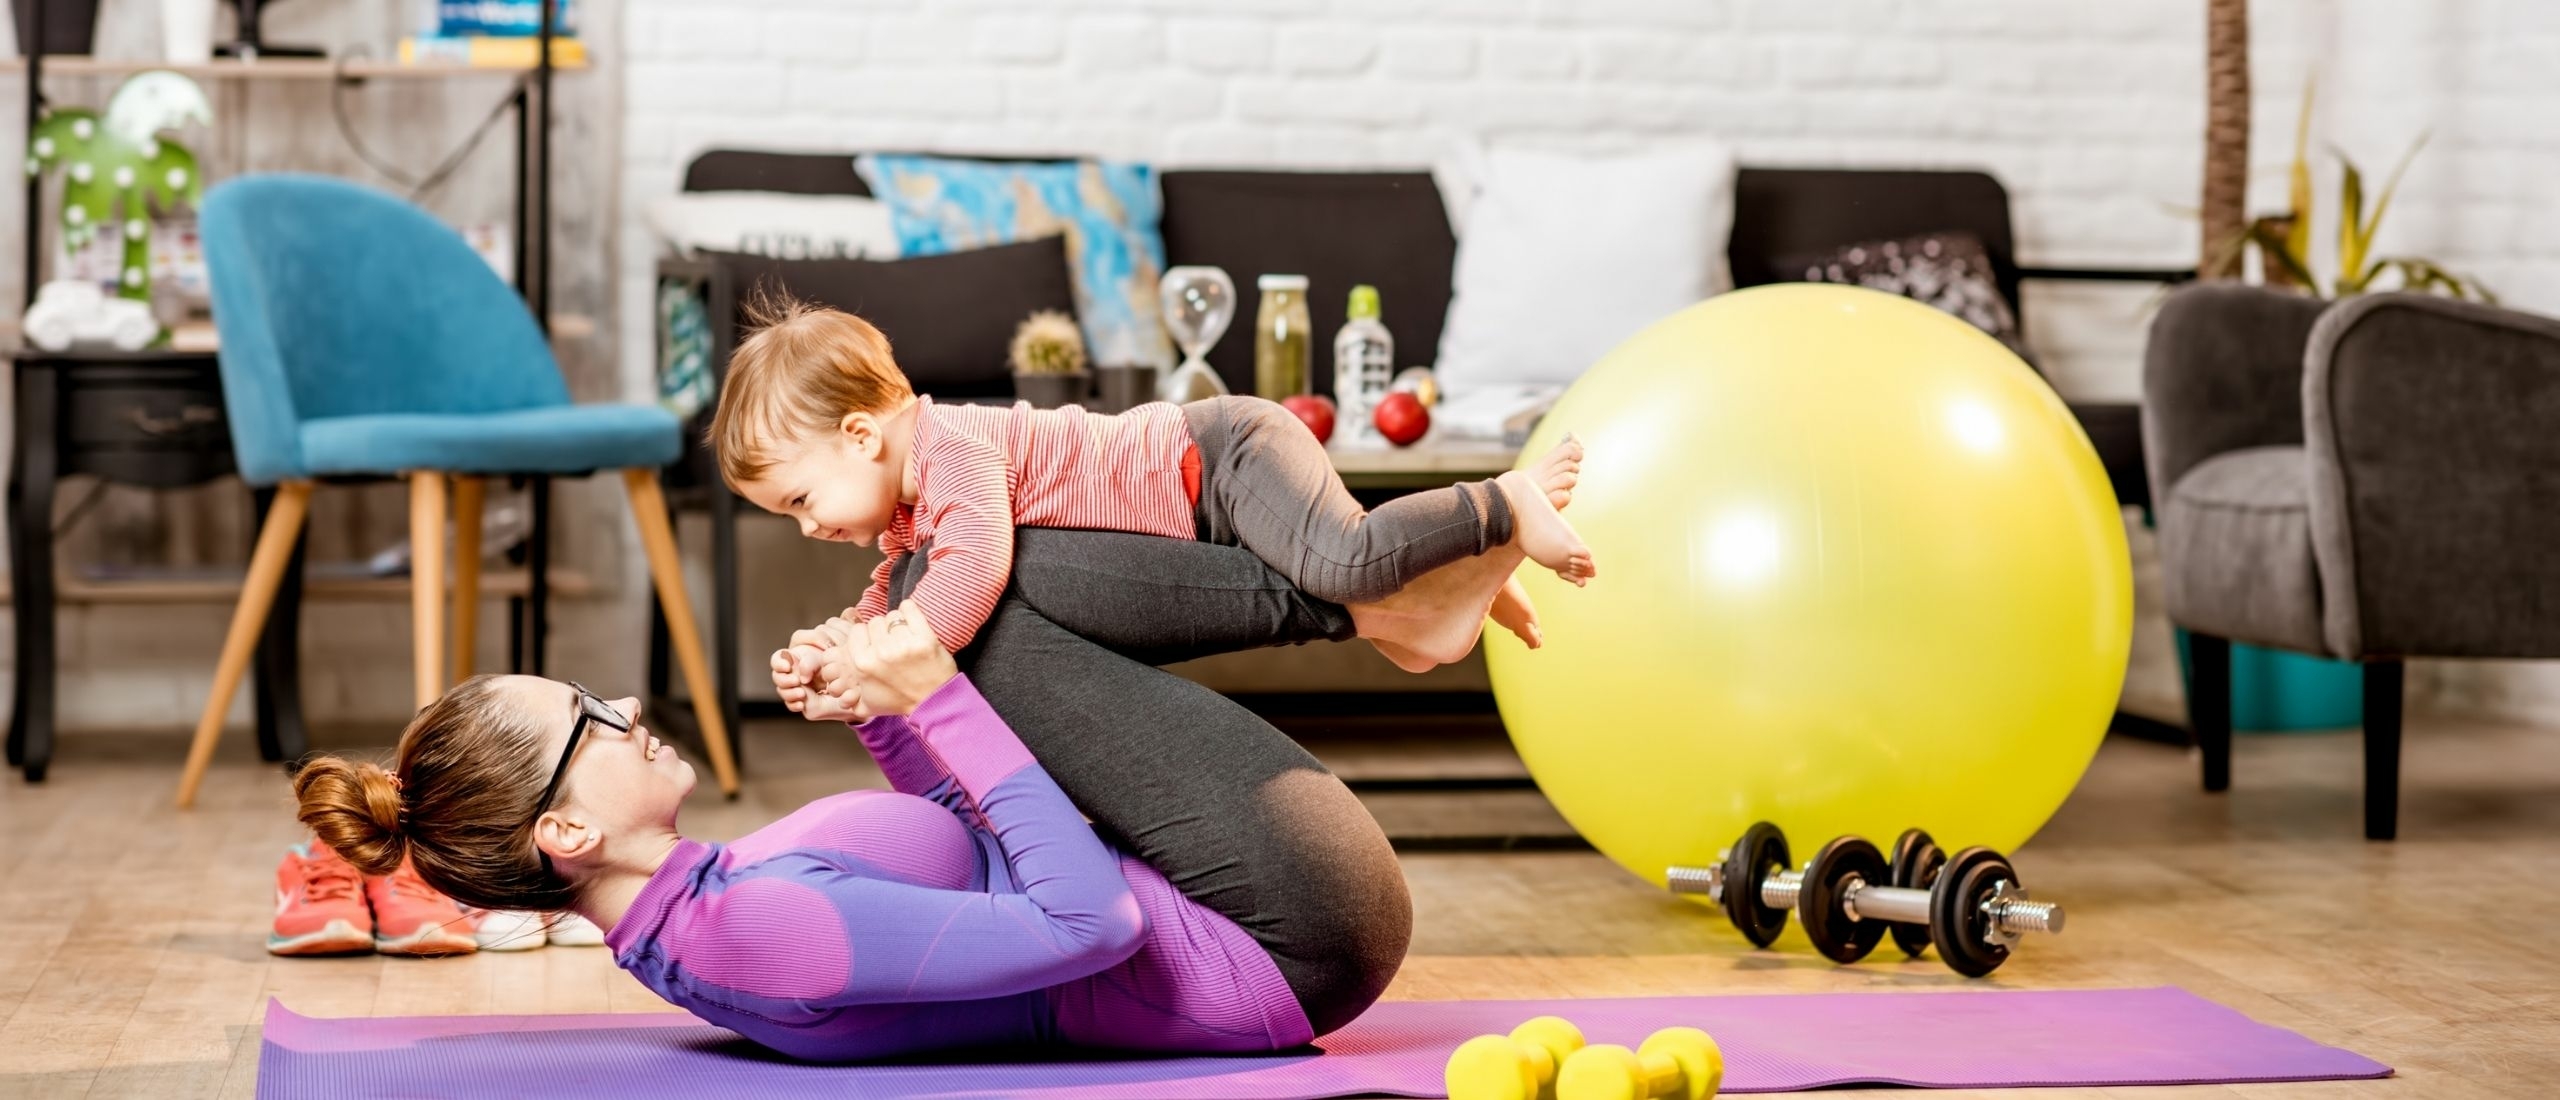 Tips for toddler and preschool gymnastics at home with small equipment!